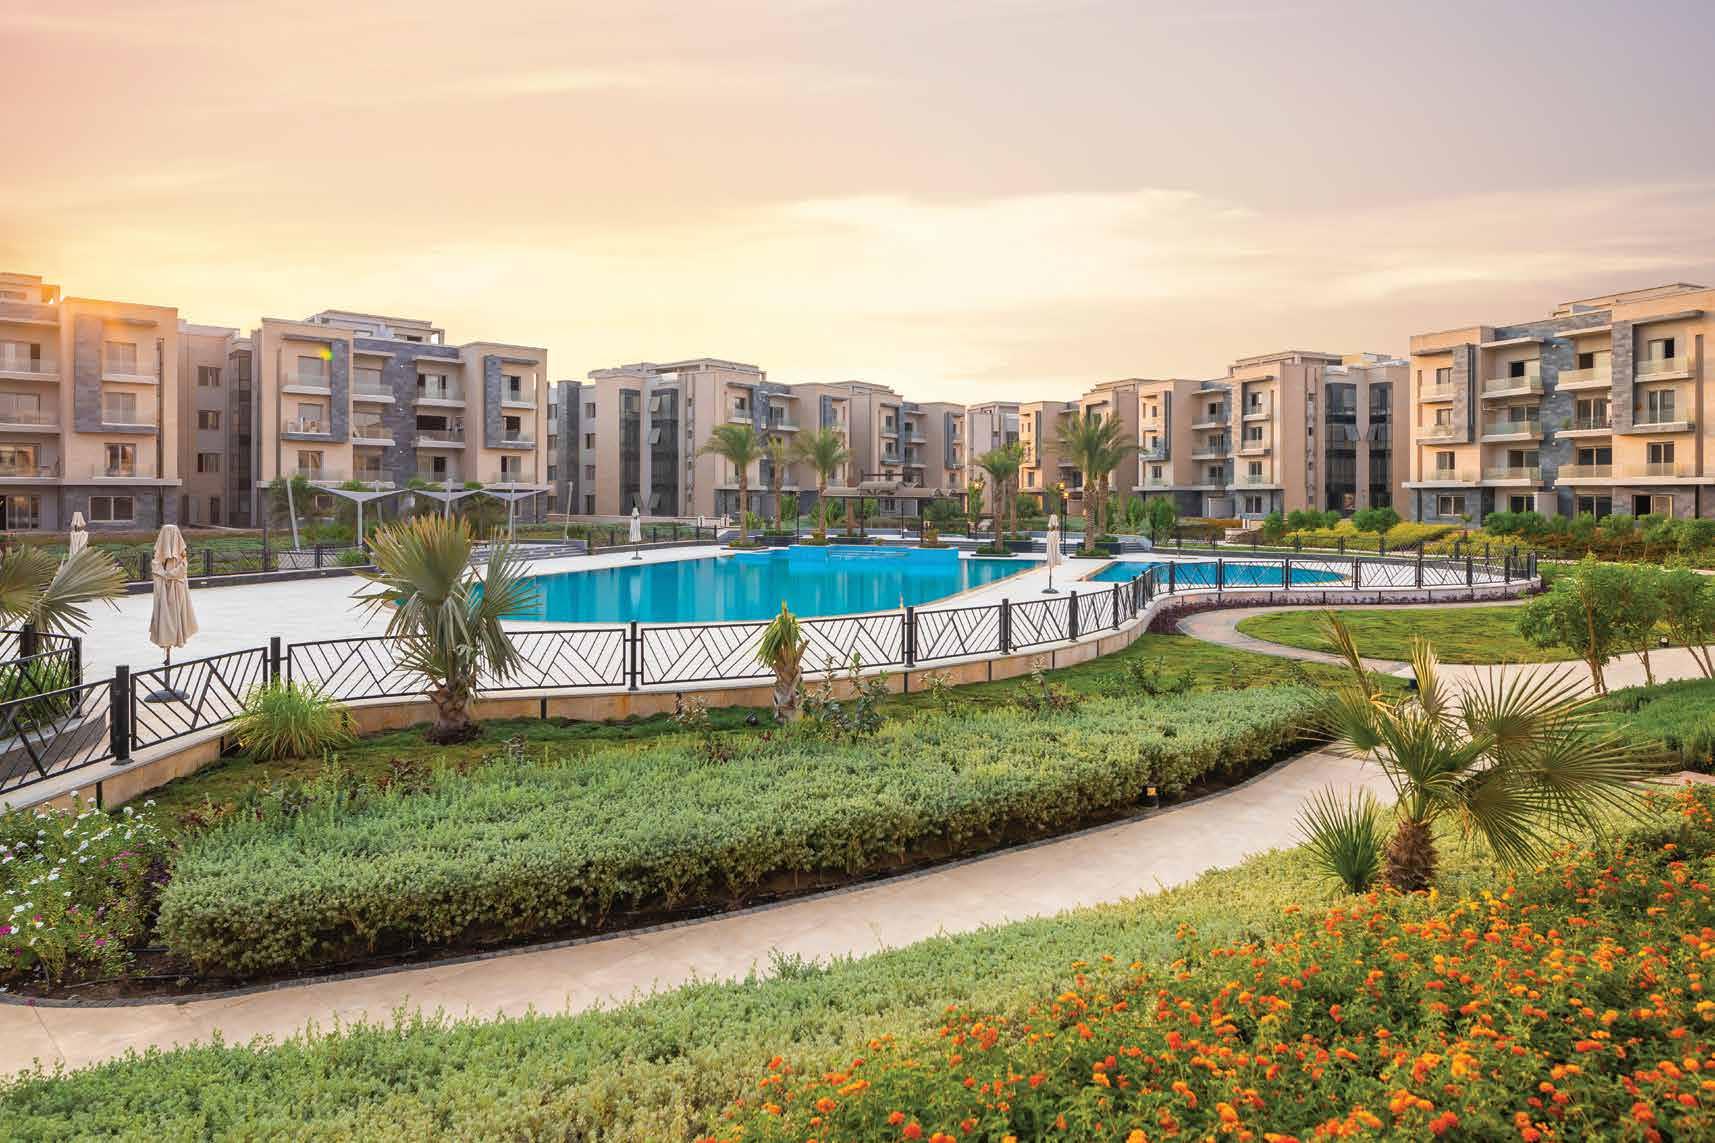 The cheapest apartment 158m for sale in a garden in Galleria Moon Valley from Arabia